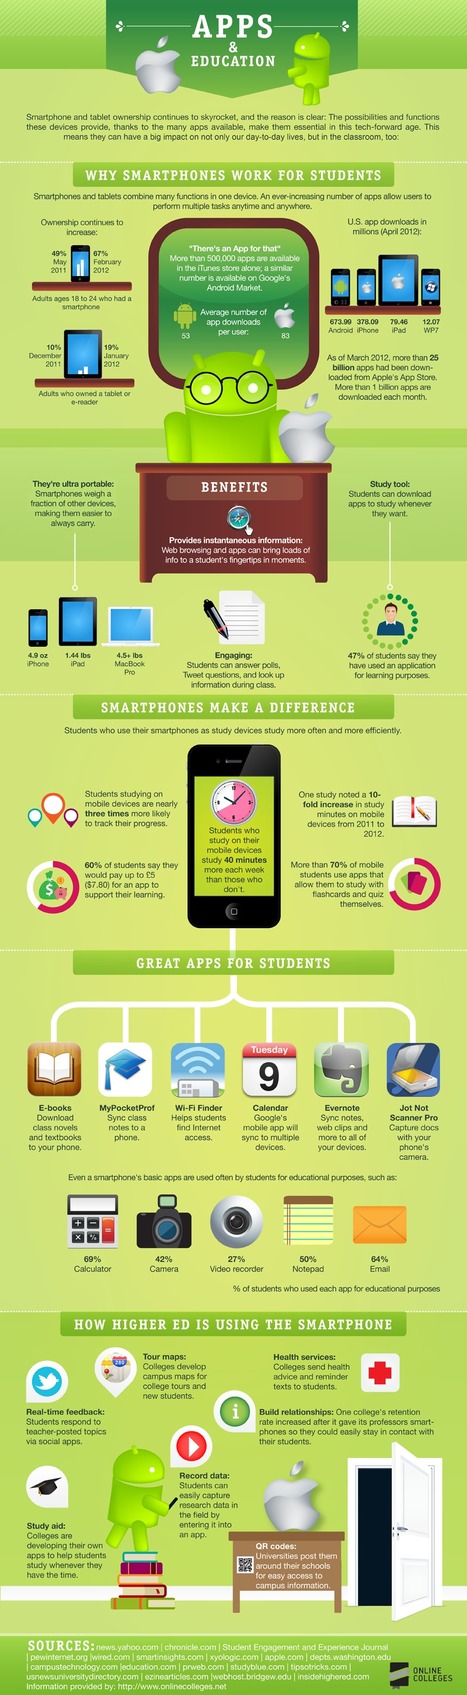 INFOGRAPHIC: Apps and Education | MarketingHits | Scoop.it